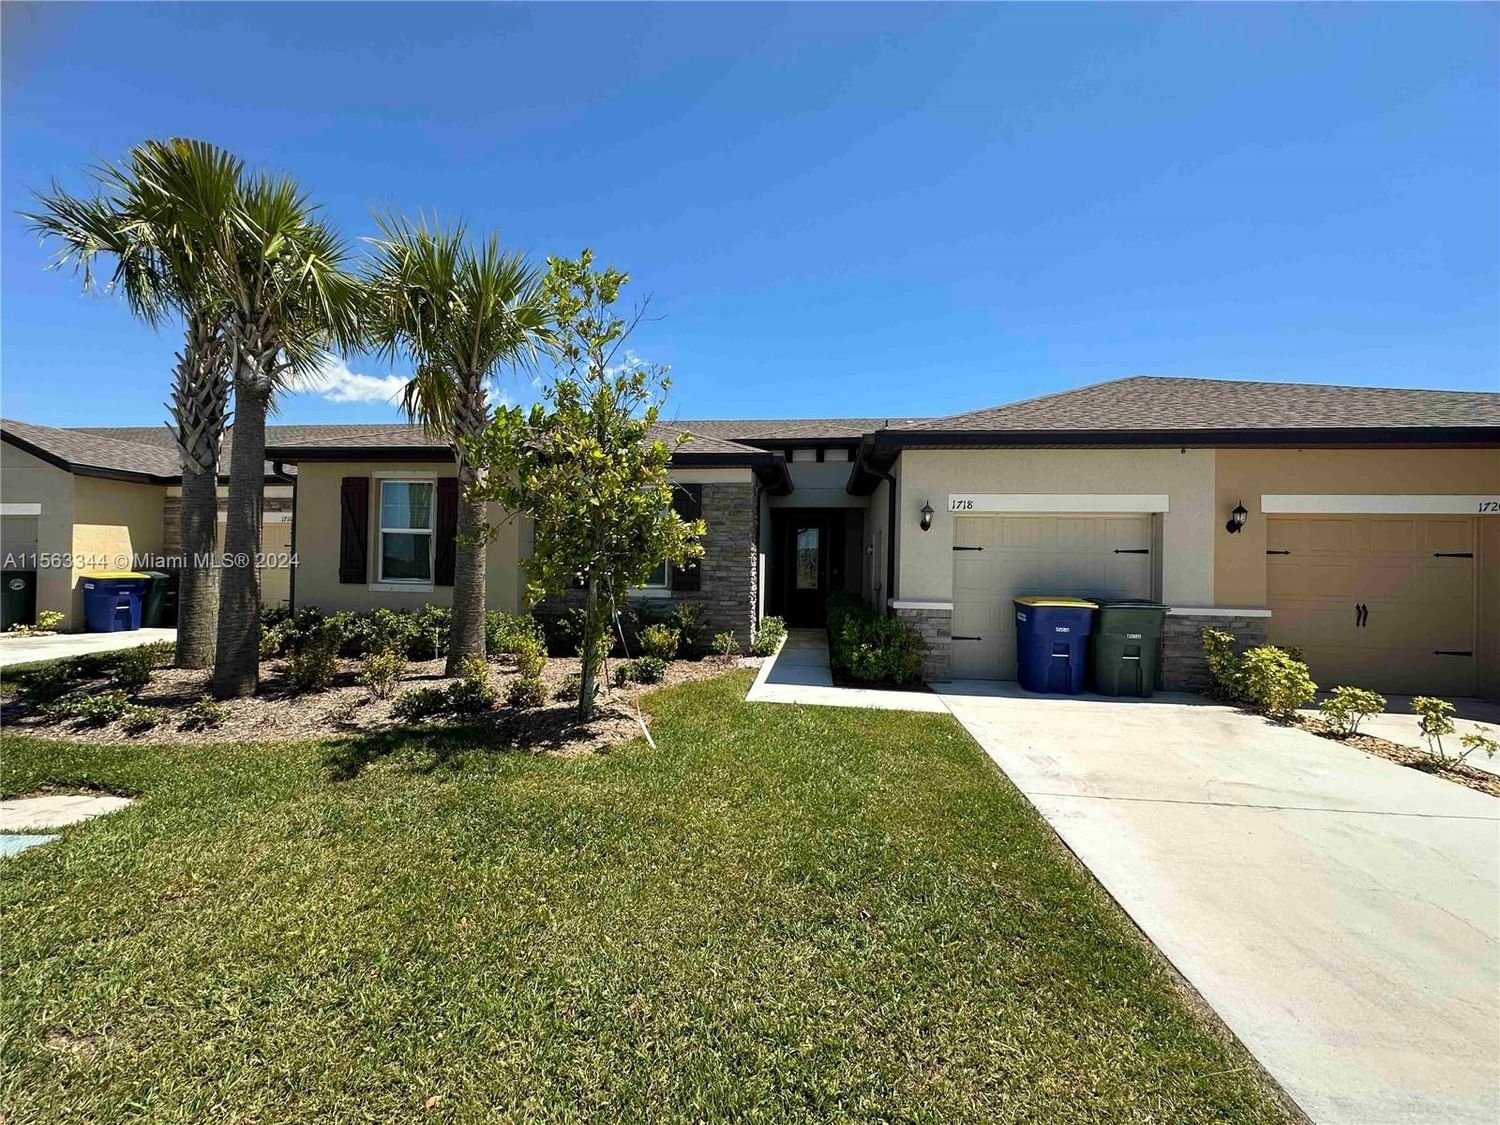 Real estate property located at 1718 Celebration Dr, St Lucie County, CELEBRATION POINTE, Fort Pierce, FL